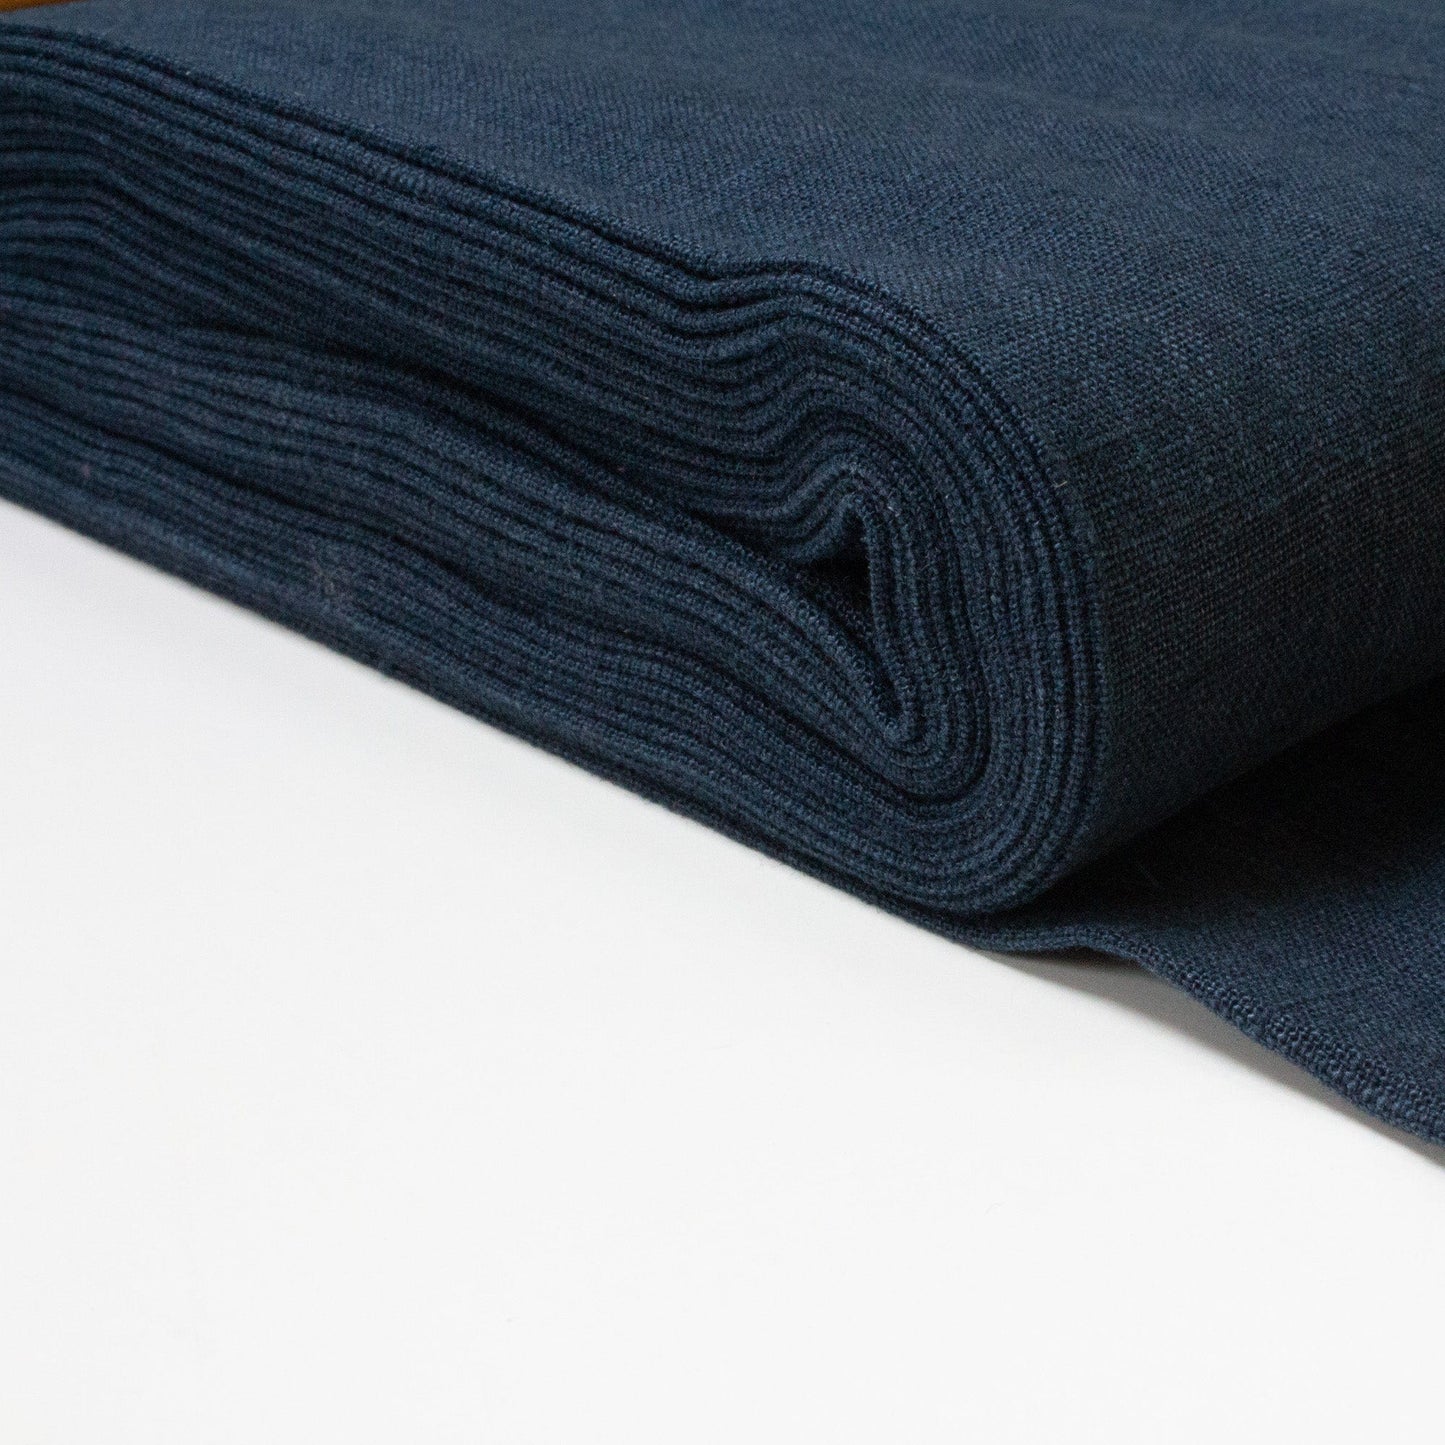 Washed Linen in Navy Blue